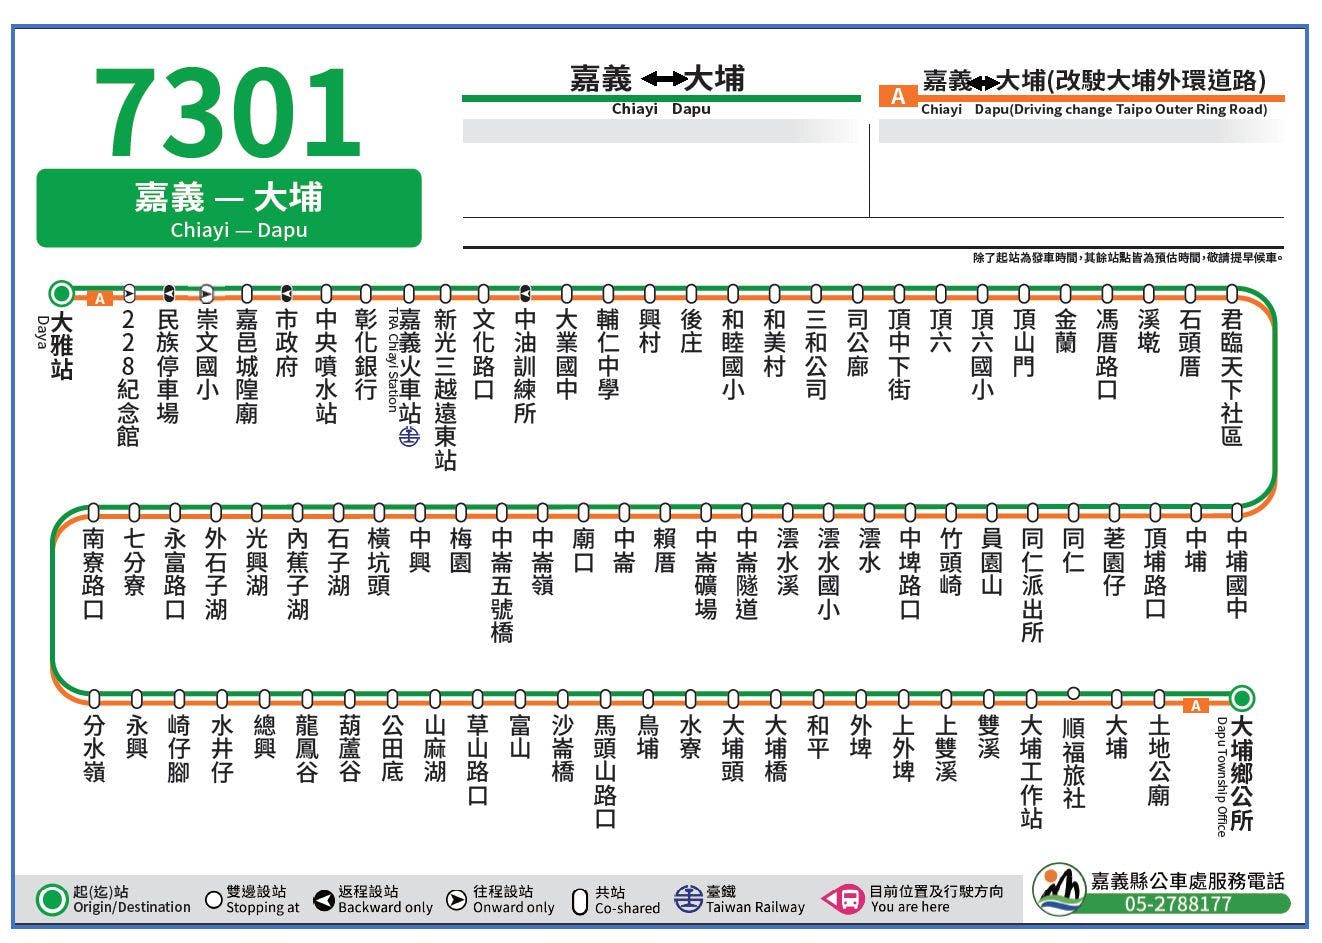 7301Route Map-Chiayi County Bus Service Administration